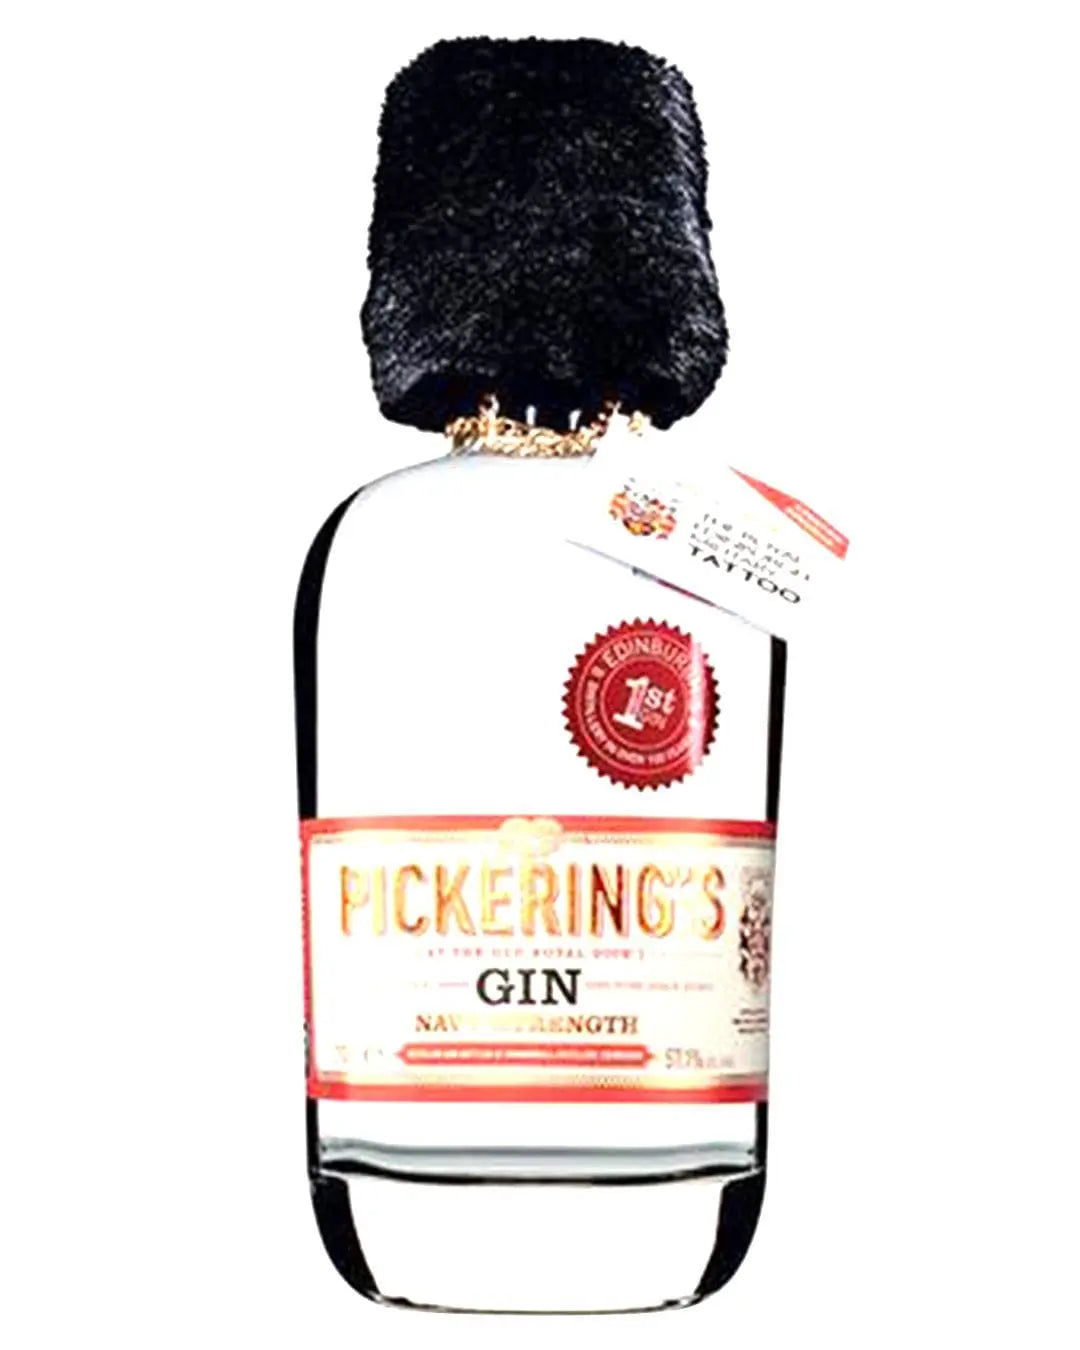 Pickering's Navy Strength Gin, 70 cl Gin